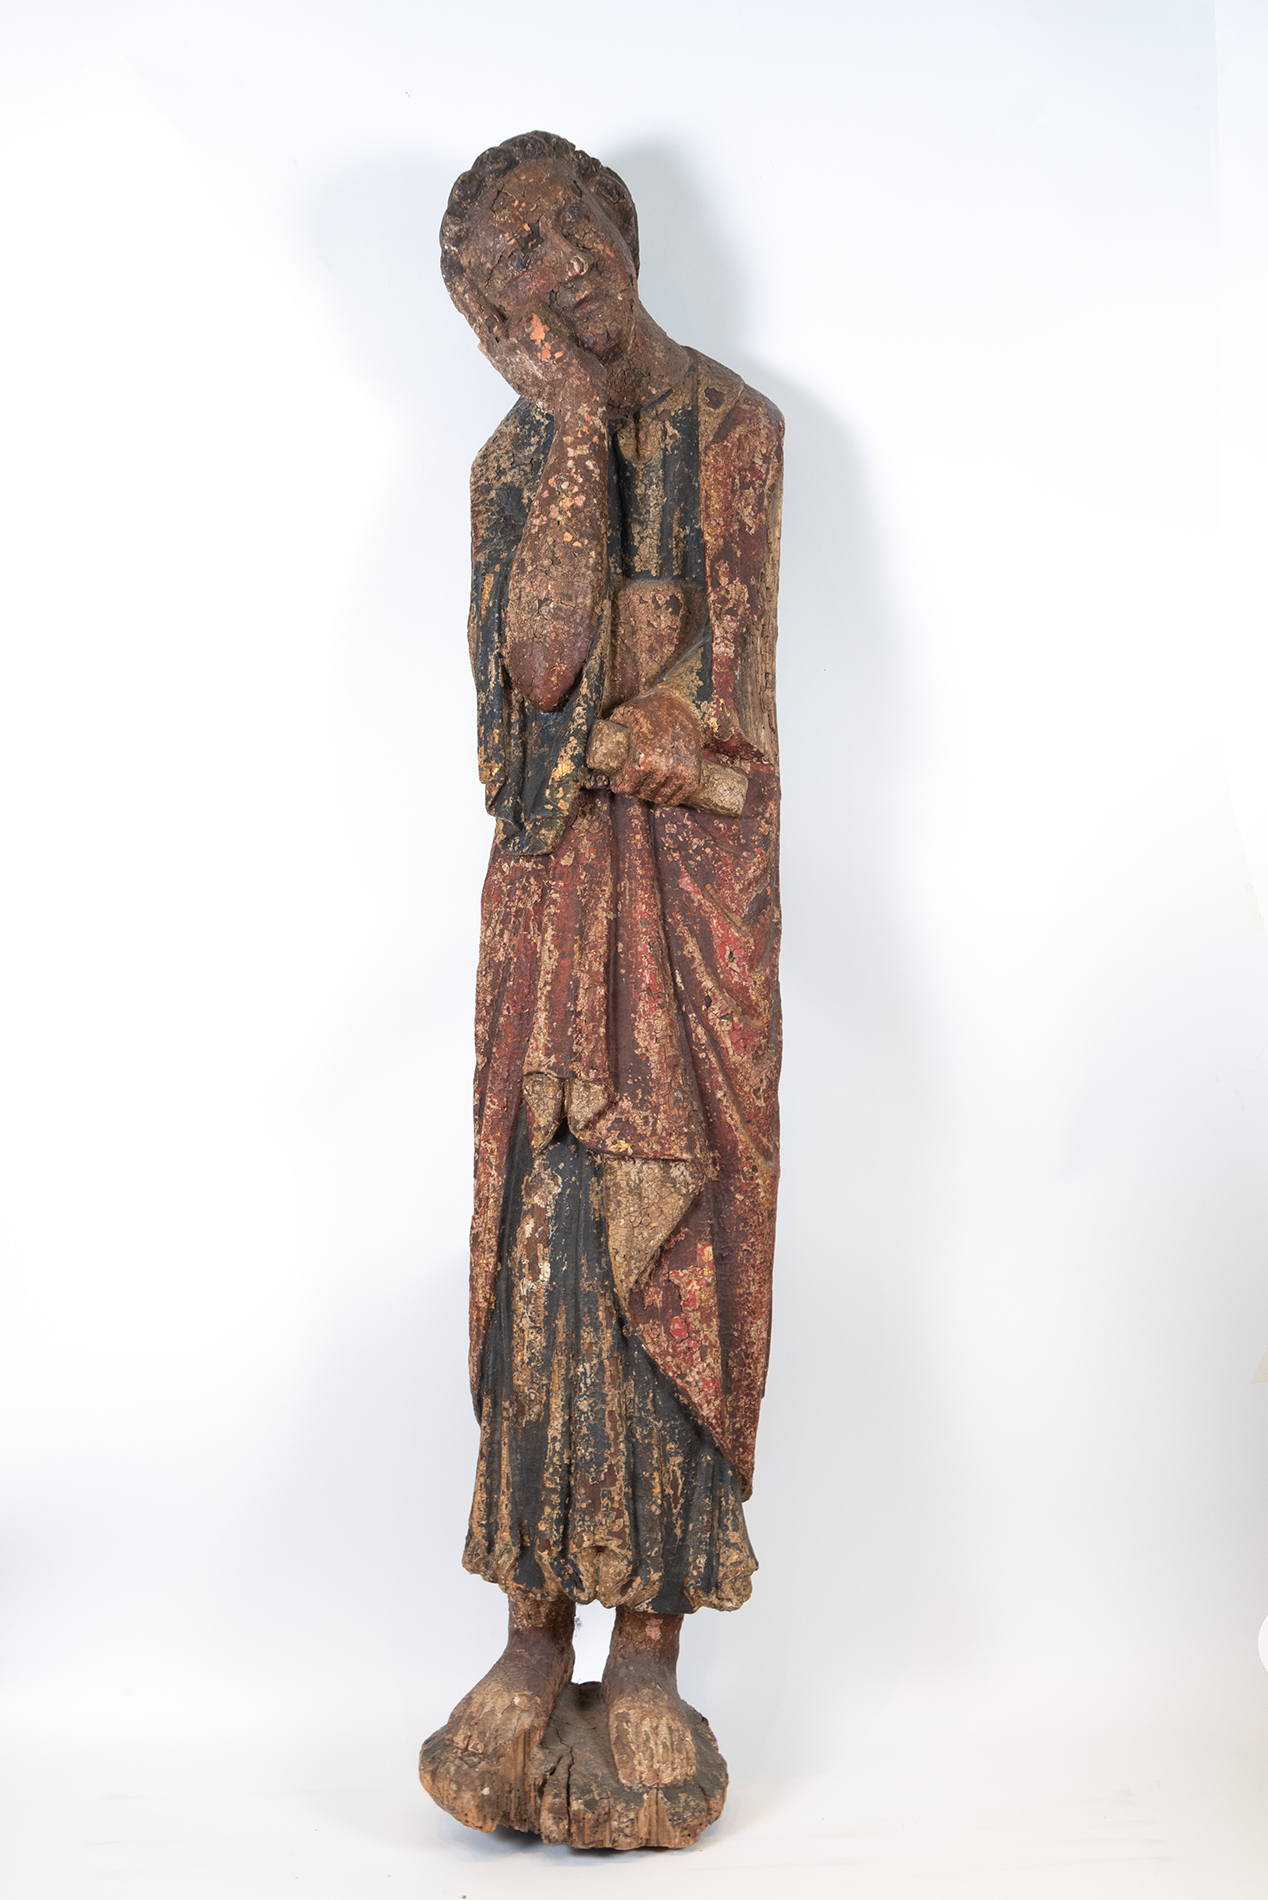 Pair of Large Romanesque Carvings representing Mary and Saint John the Evangelist, Romanesque School - Image 2 of 22